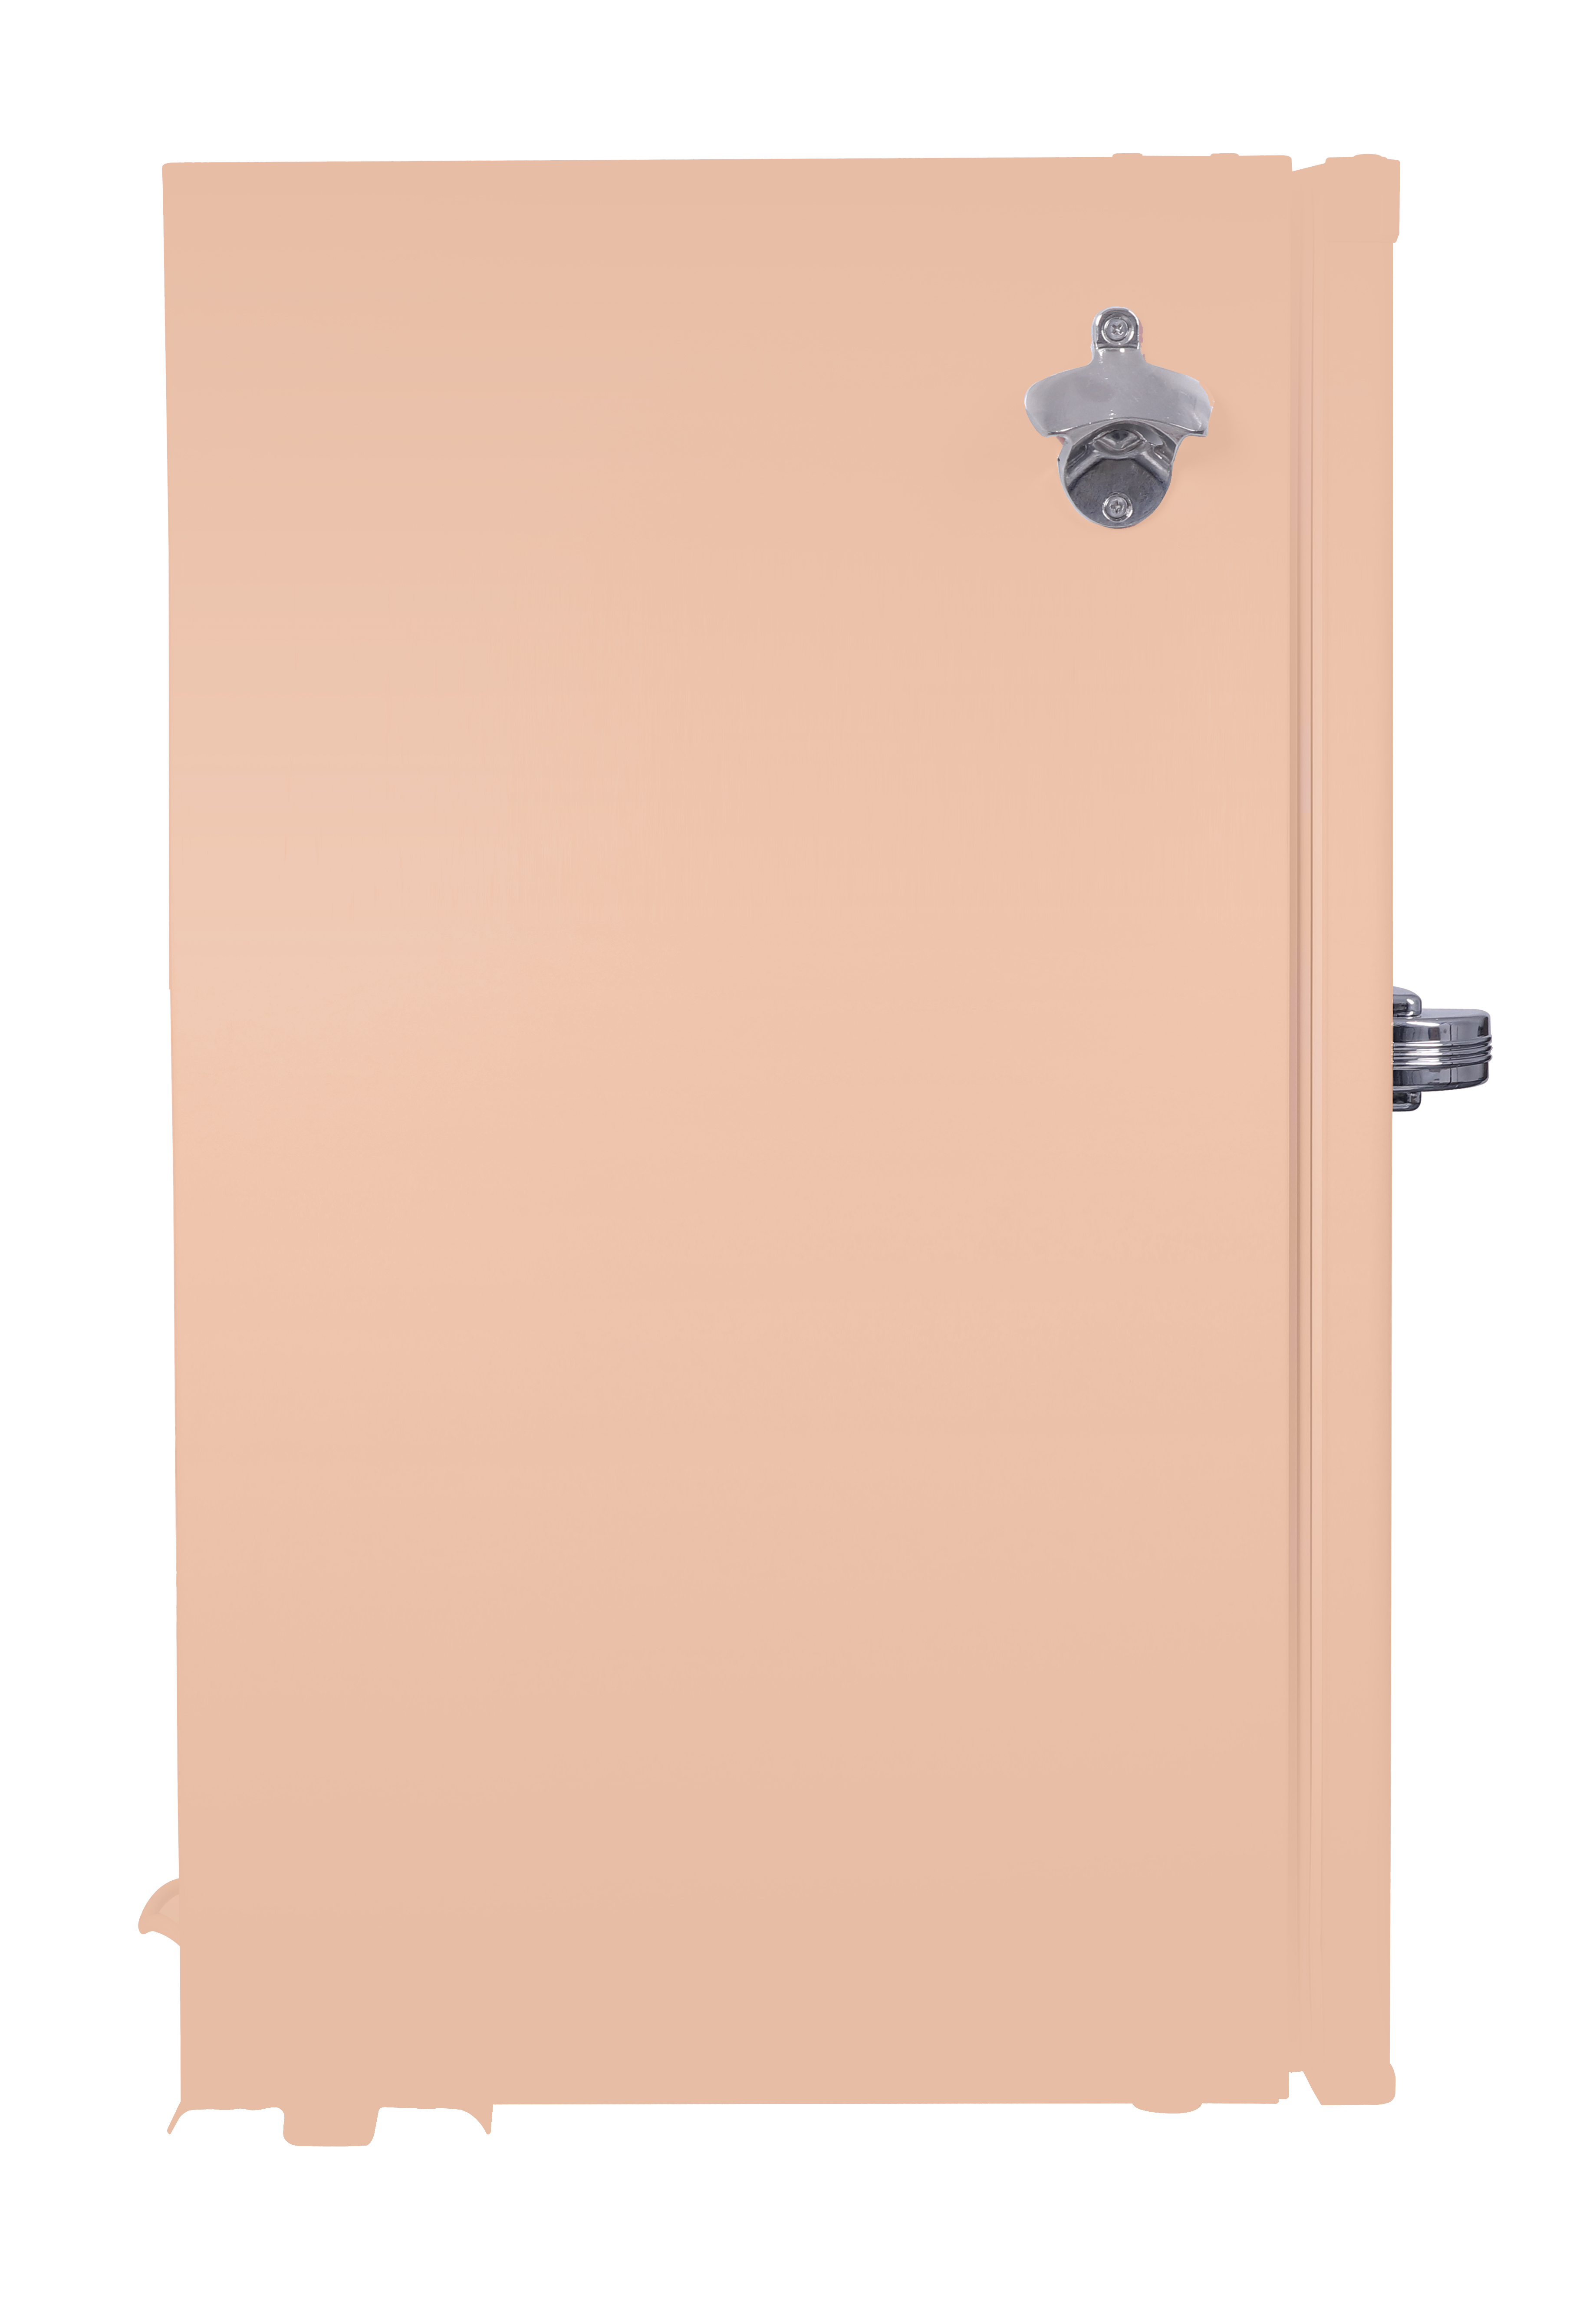 Frigidaire 3.2 Cu ft Retro Compact Refrigerator With Side Bottle Opener EFR376, Coral - image 2 of 11